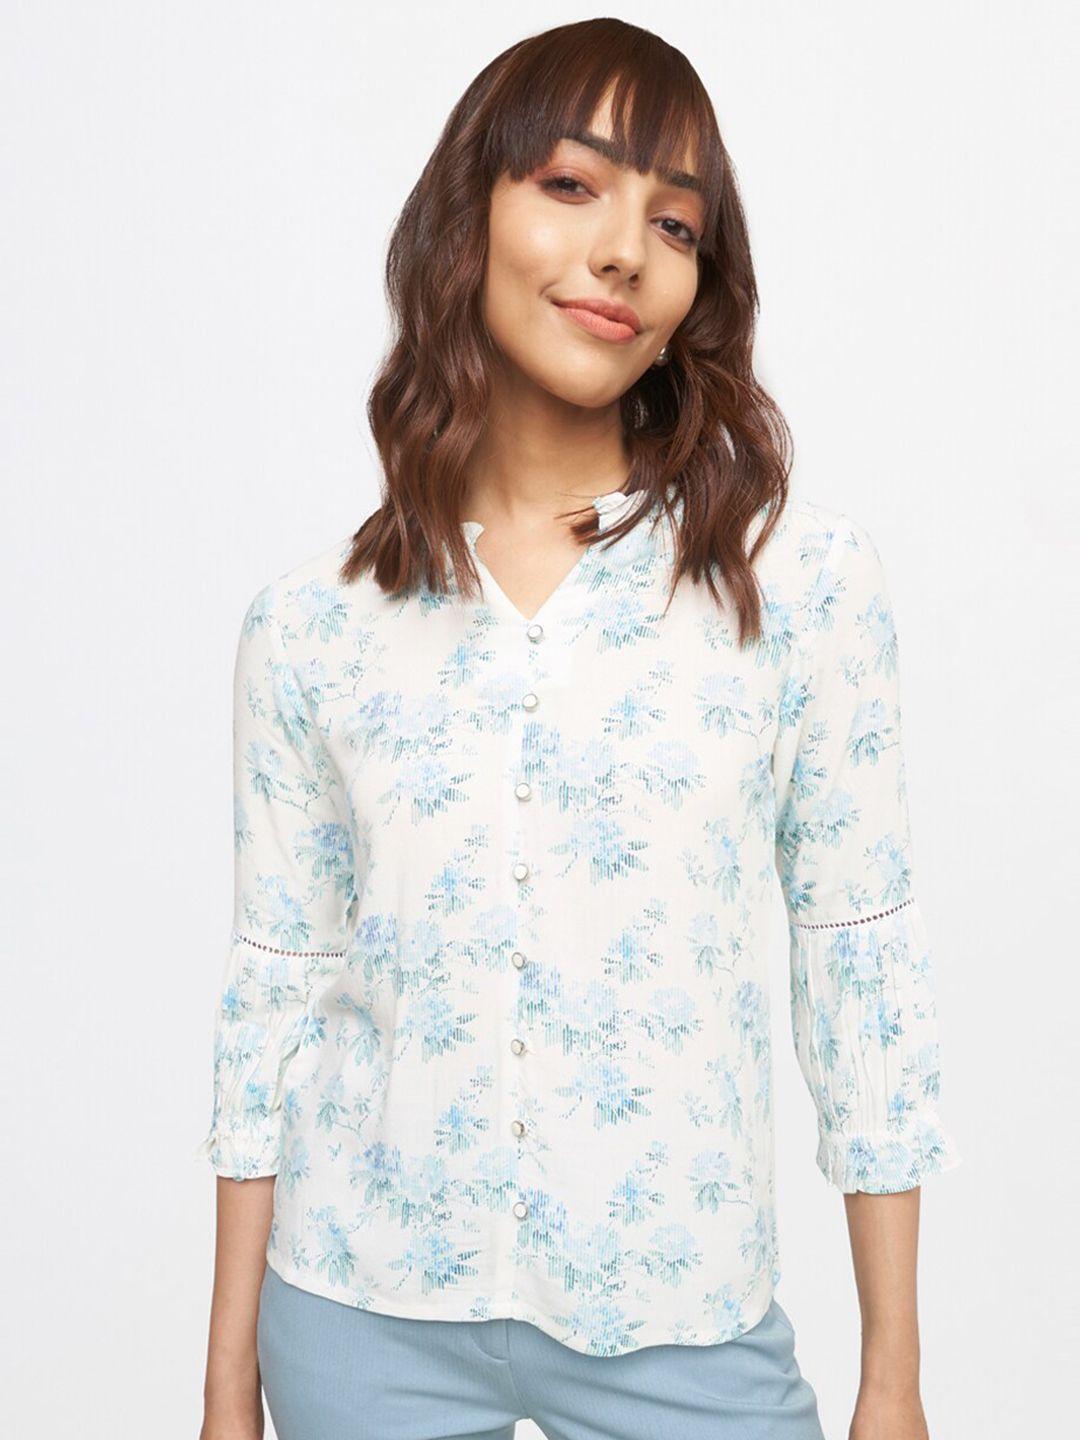 and white & blue floral print mandarin collar shirt style top